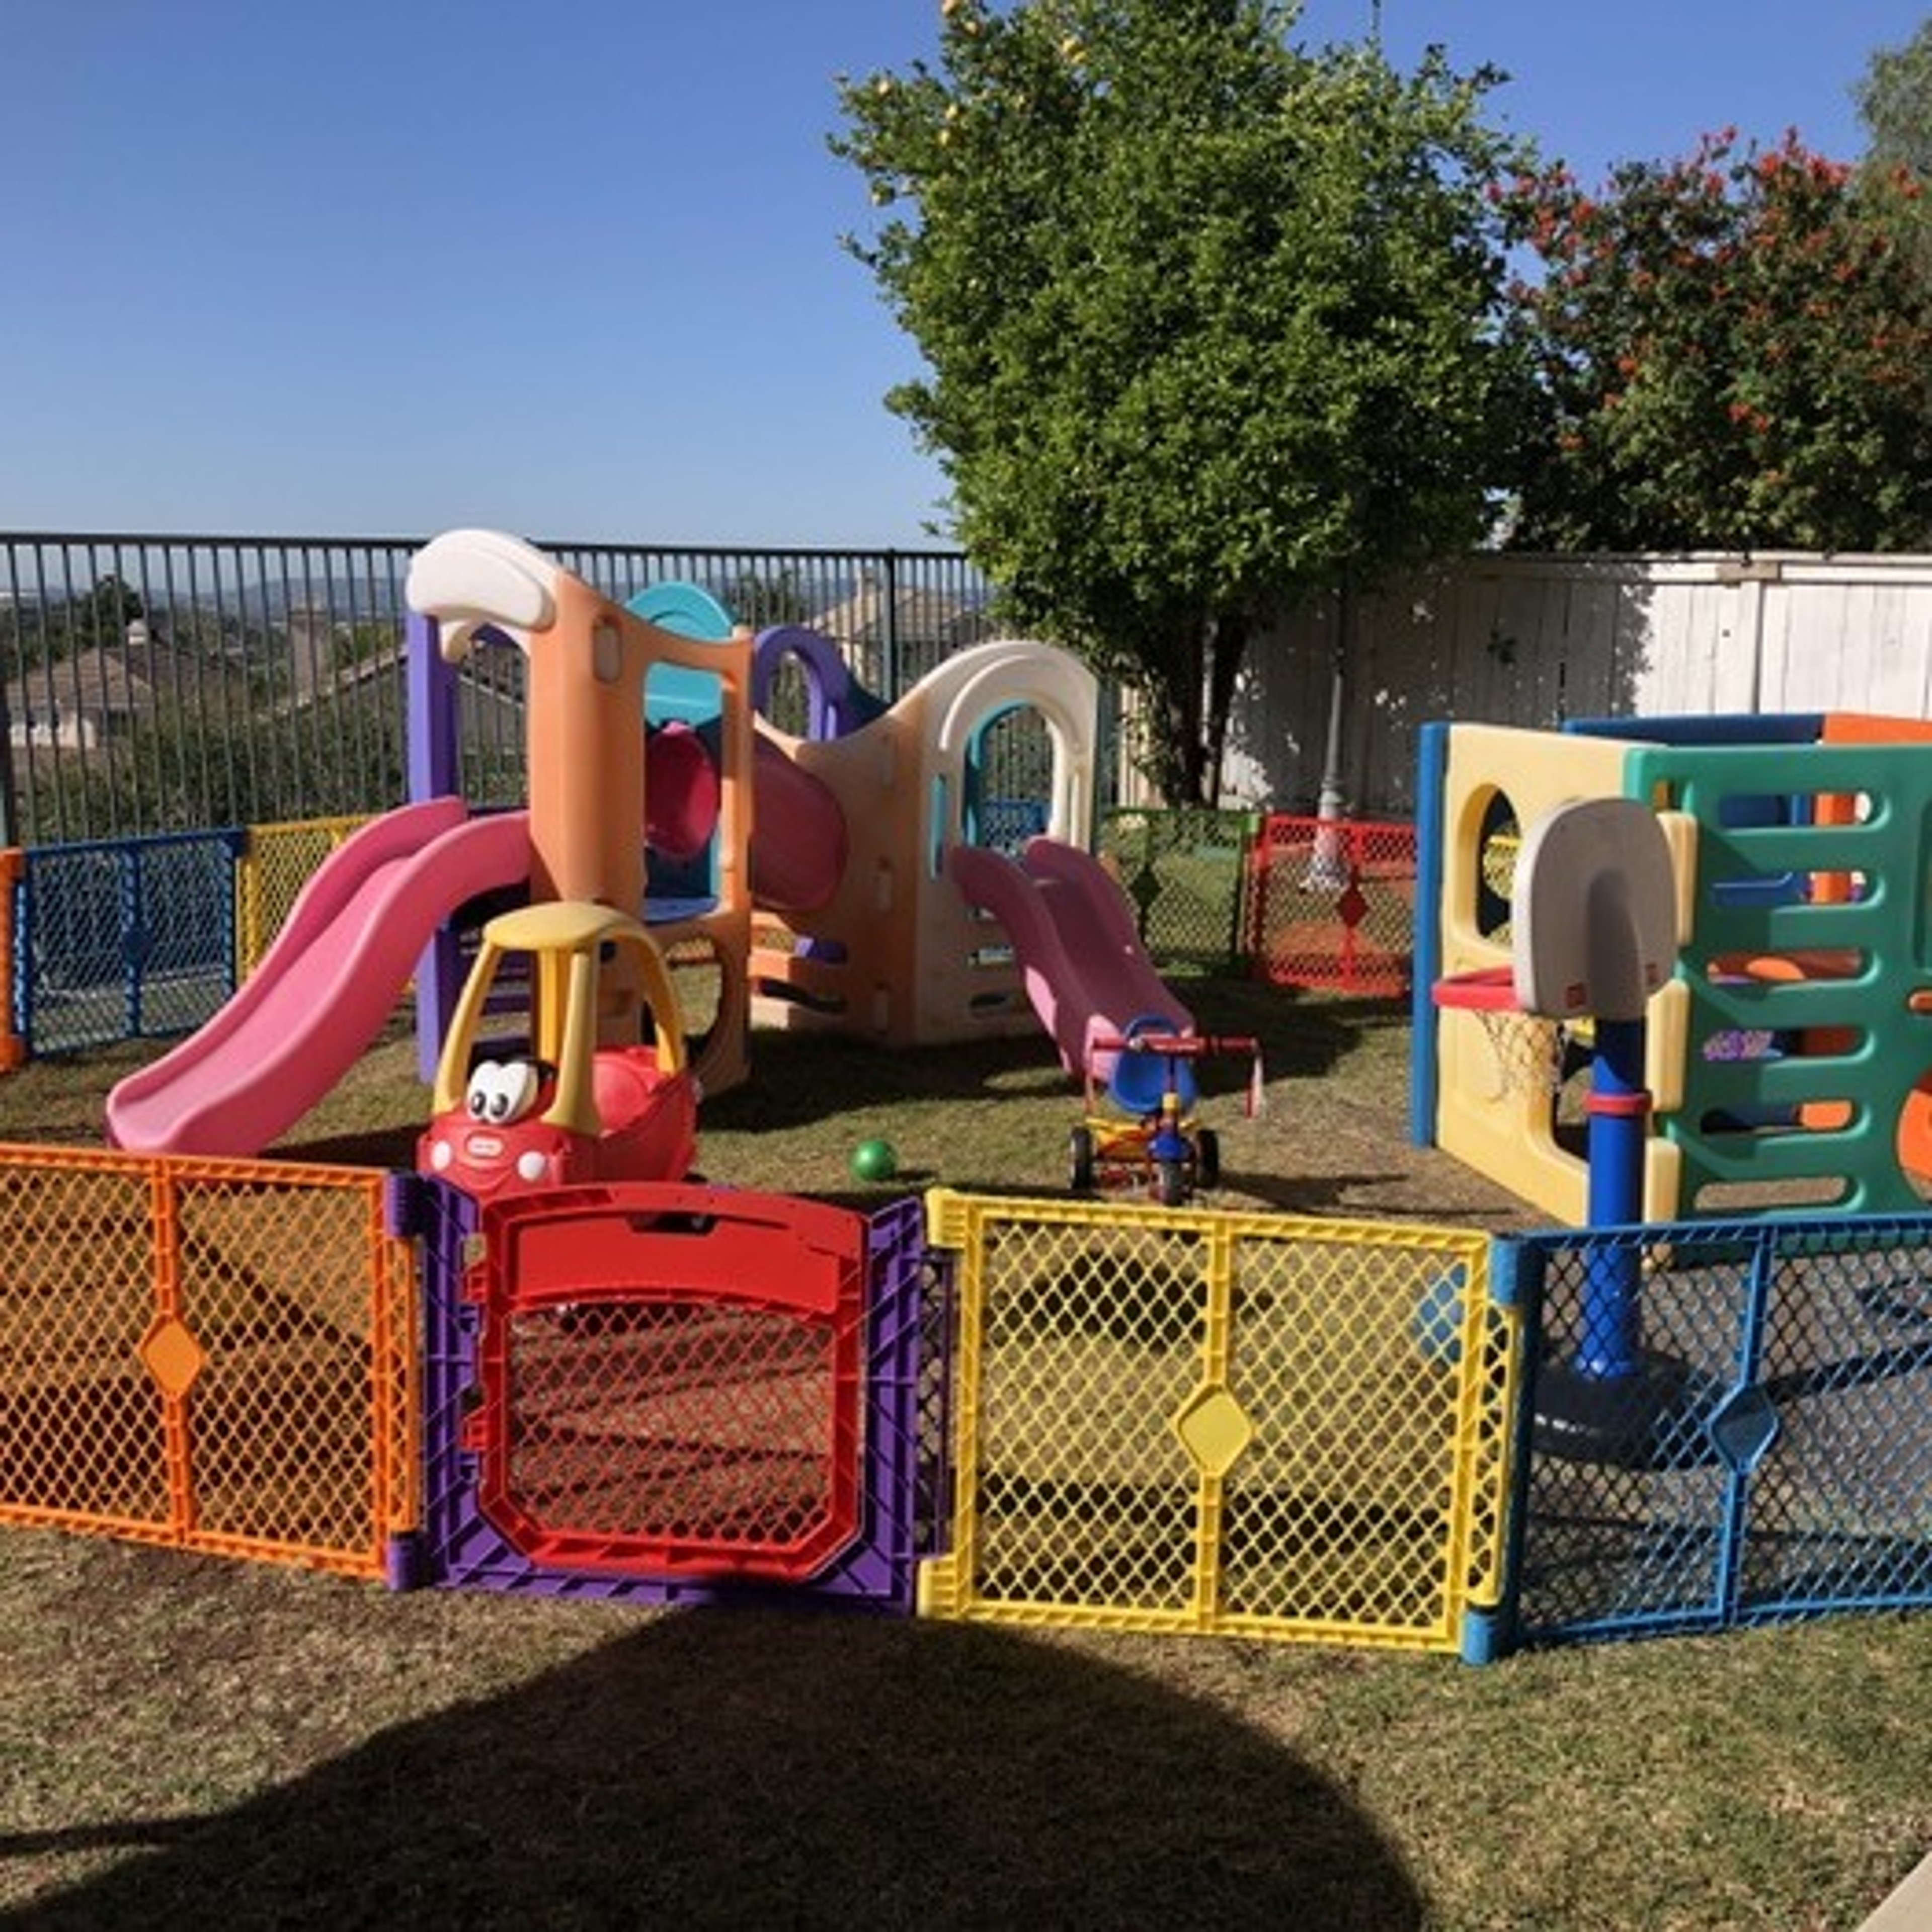 Foothill Ranch Best Home Daycare at Lulu’s Fun House!